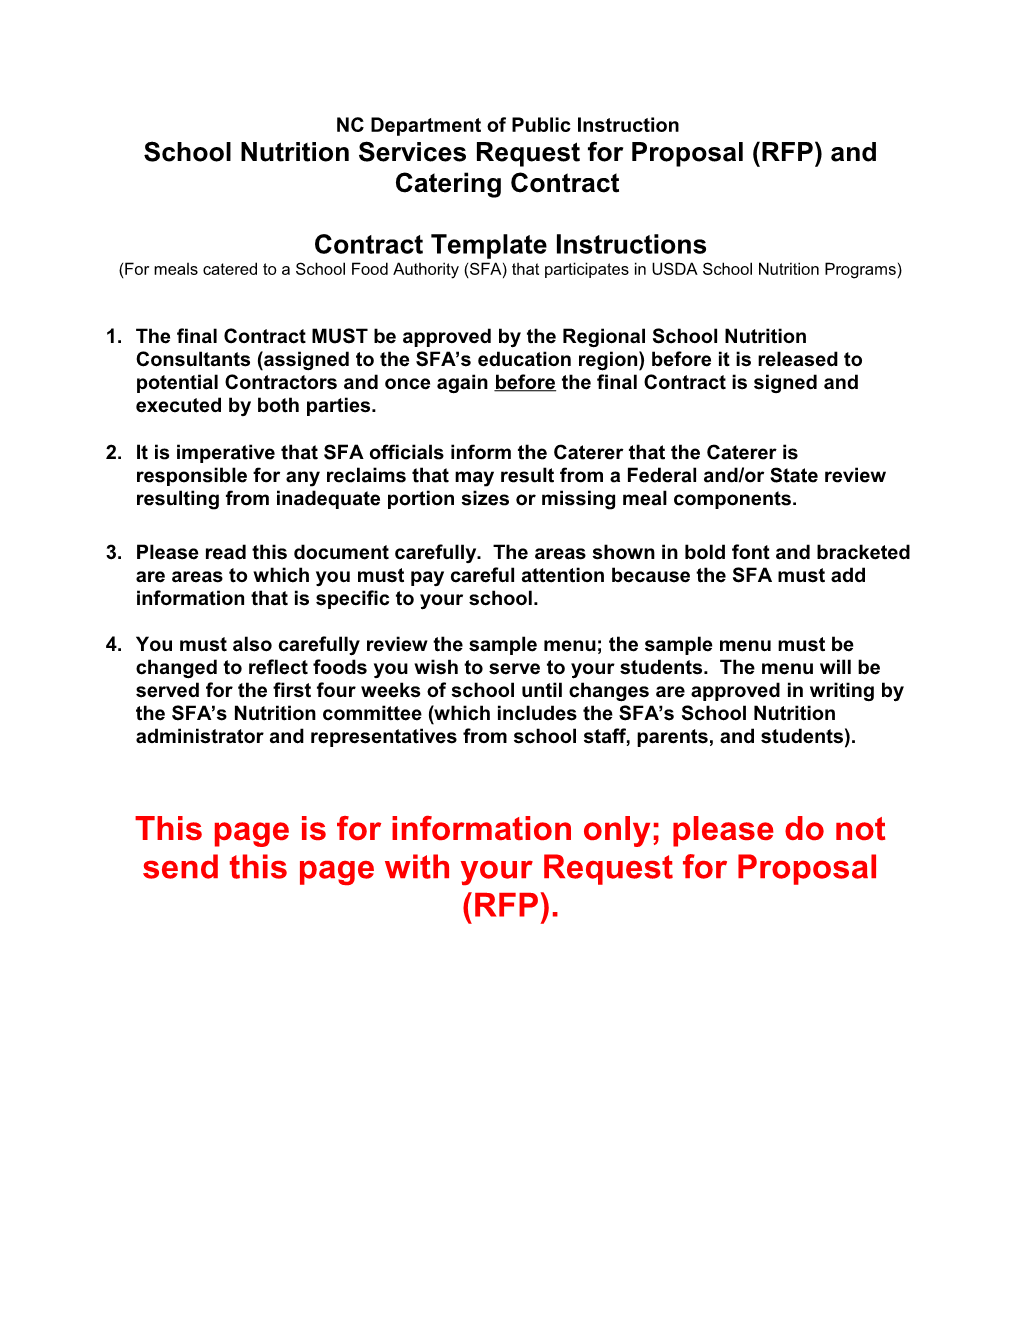 School Nutrition Services Request for Proposal (RFP) and Catering Contract